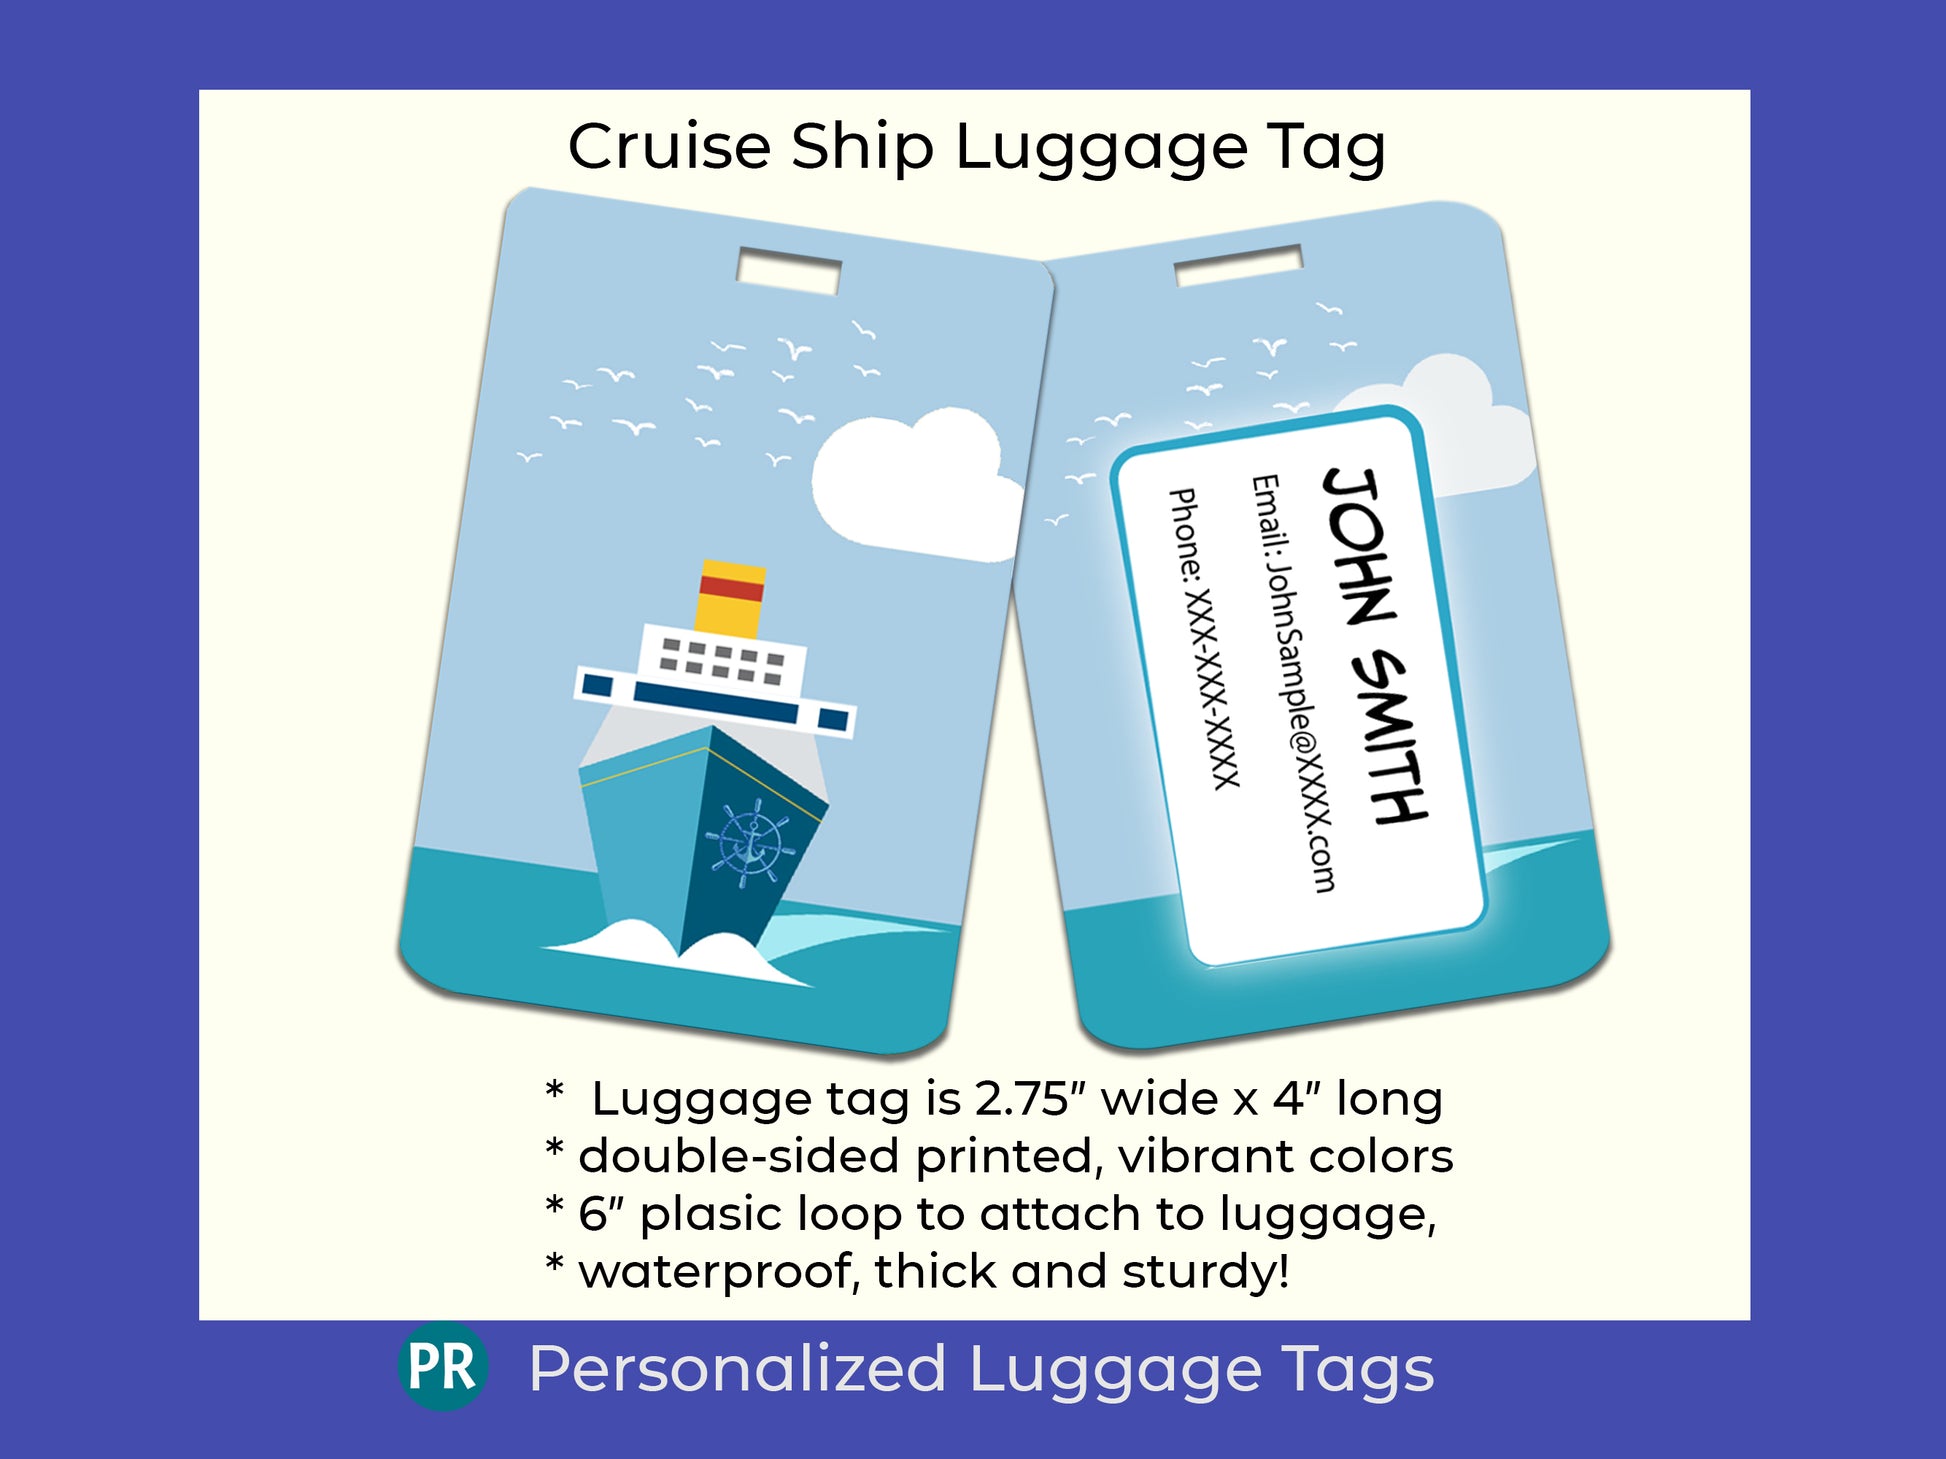 Luggage Tag for going a cruise! These luggage tags are made of sturdy, thick plastic and are waterproof. Front of tag there is an image of the ocean with a cruise ship. The back of the tag has your information to locate you if your baggage is lost.